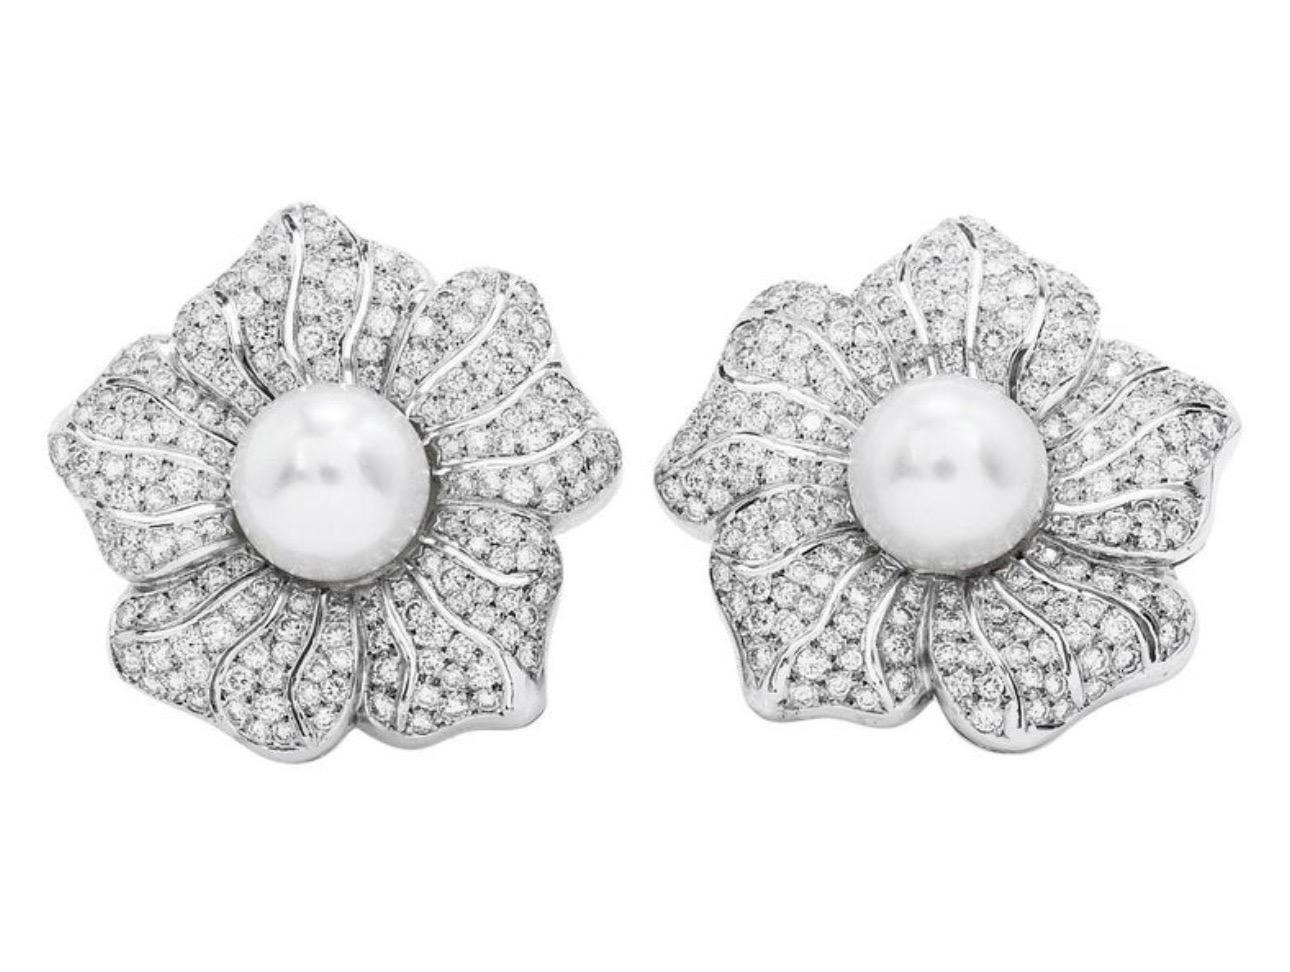 Vintage Diamond South Sea Pearl Flower 18K White Gold , Clip on / Collapsible post
Beautiful estate piece
The Earrings are composed of 2 finest 11  mm south sea pearl  with no blemishes on it ,  pearls of an incredibly high luster  
These earrings